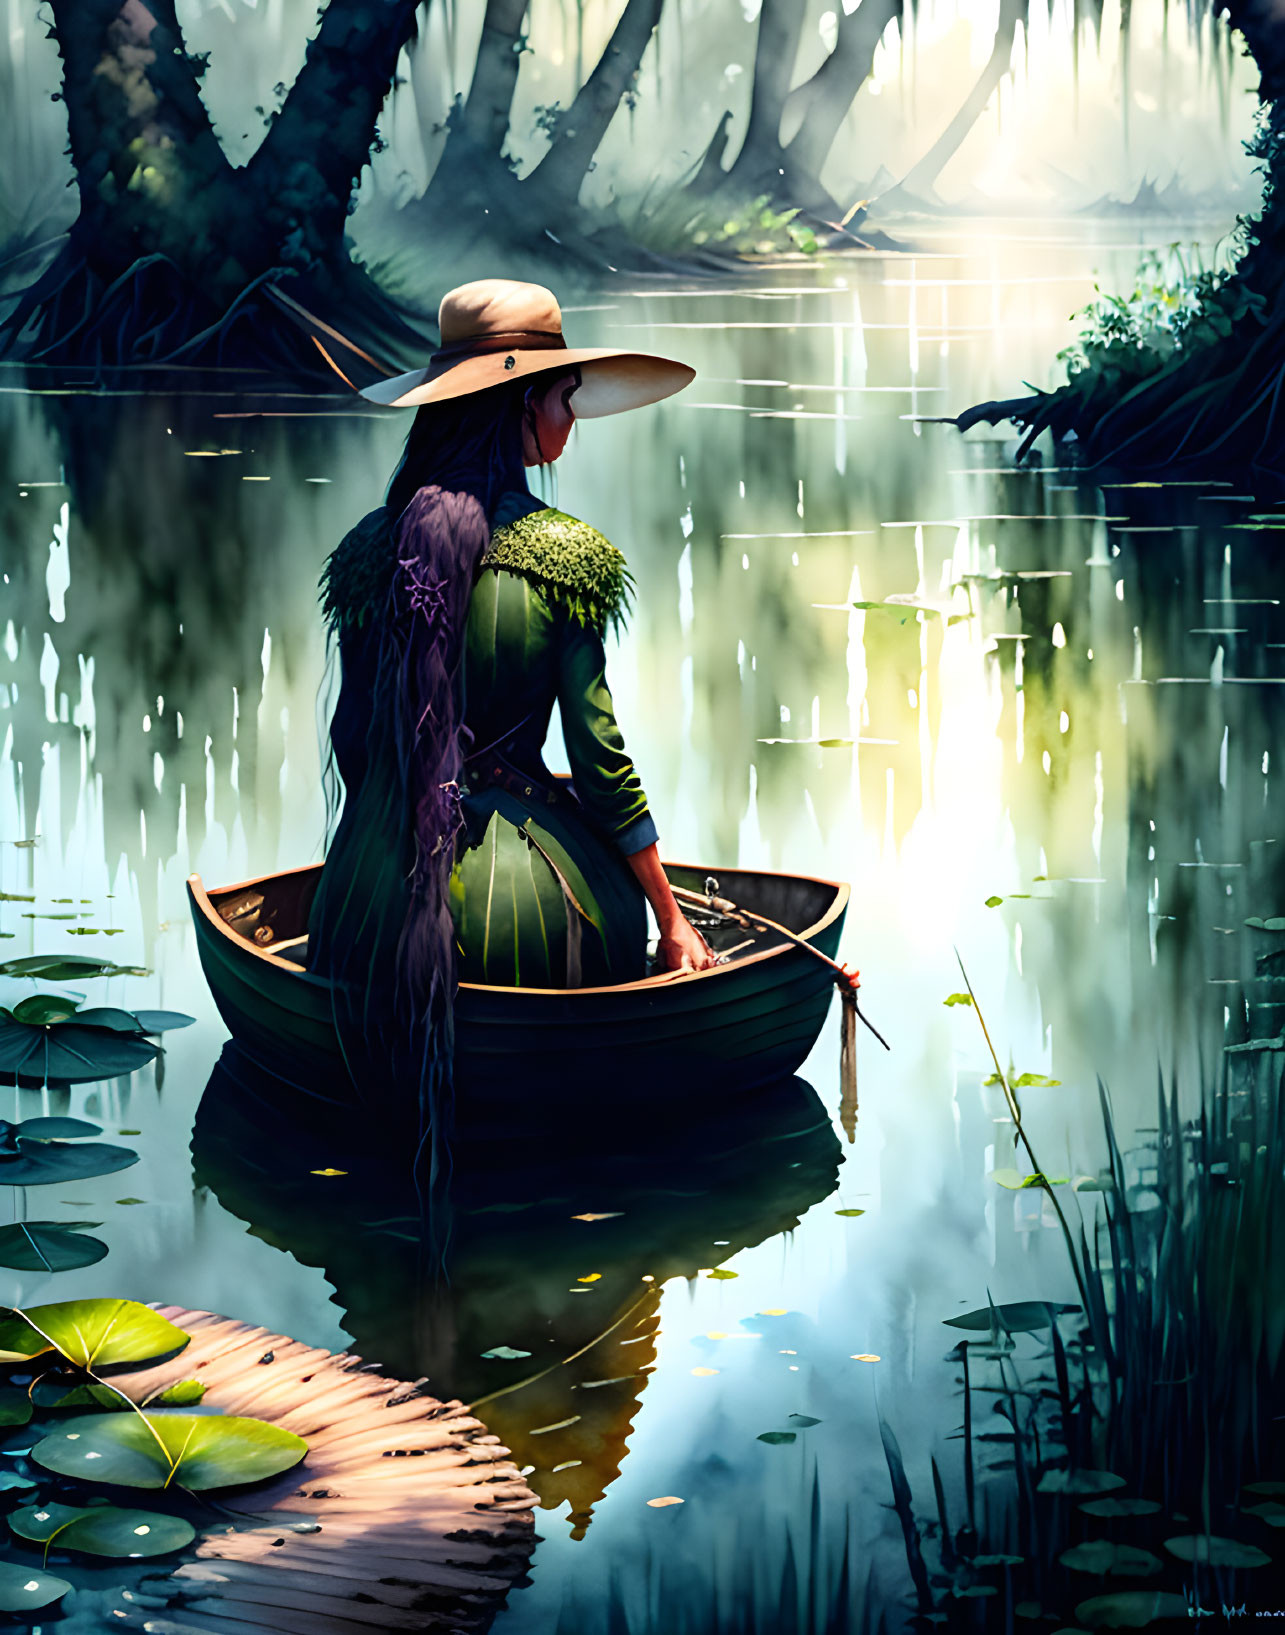 Woman in broad-brimmed hat in boat among water lilies in misty swamp